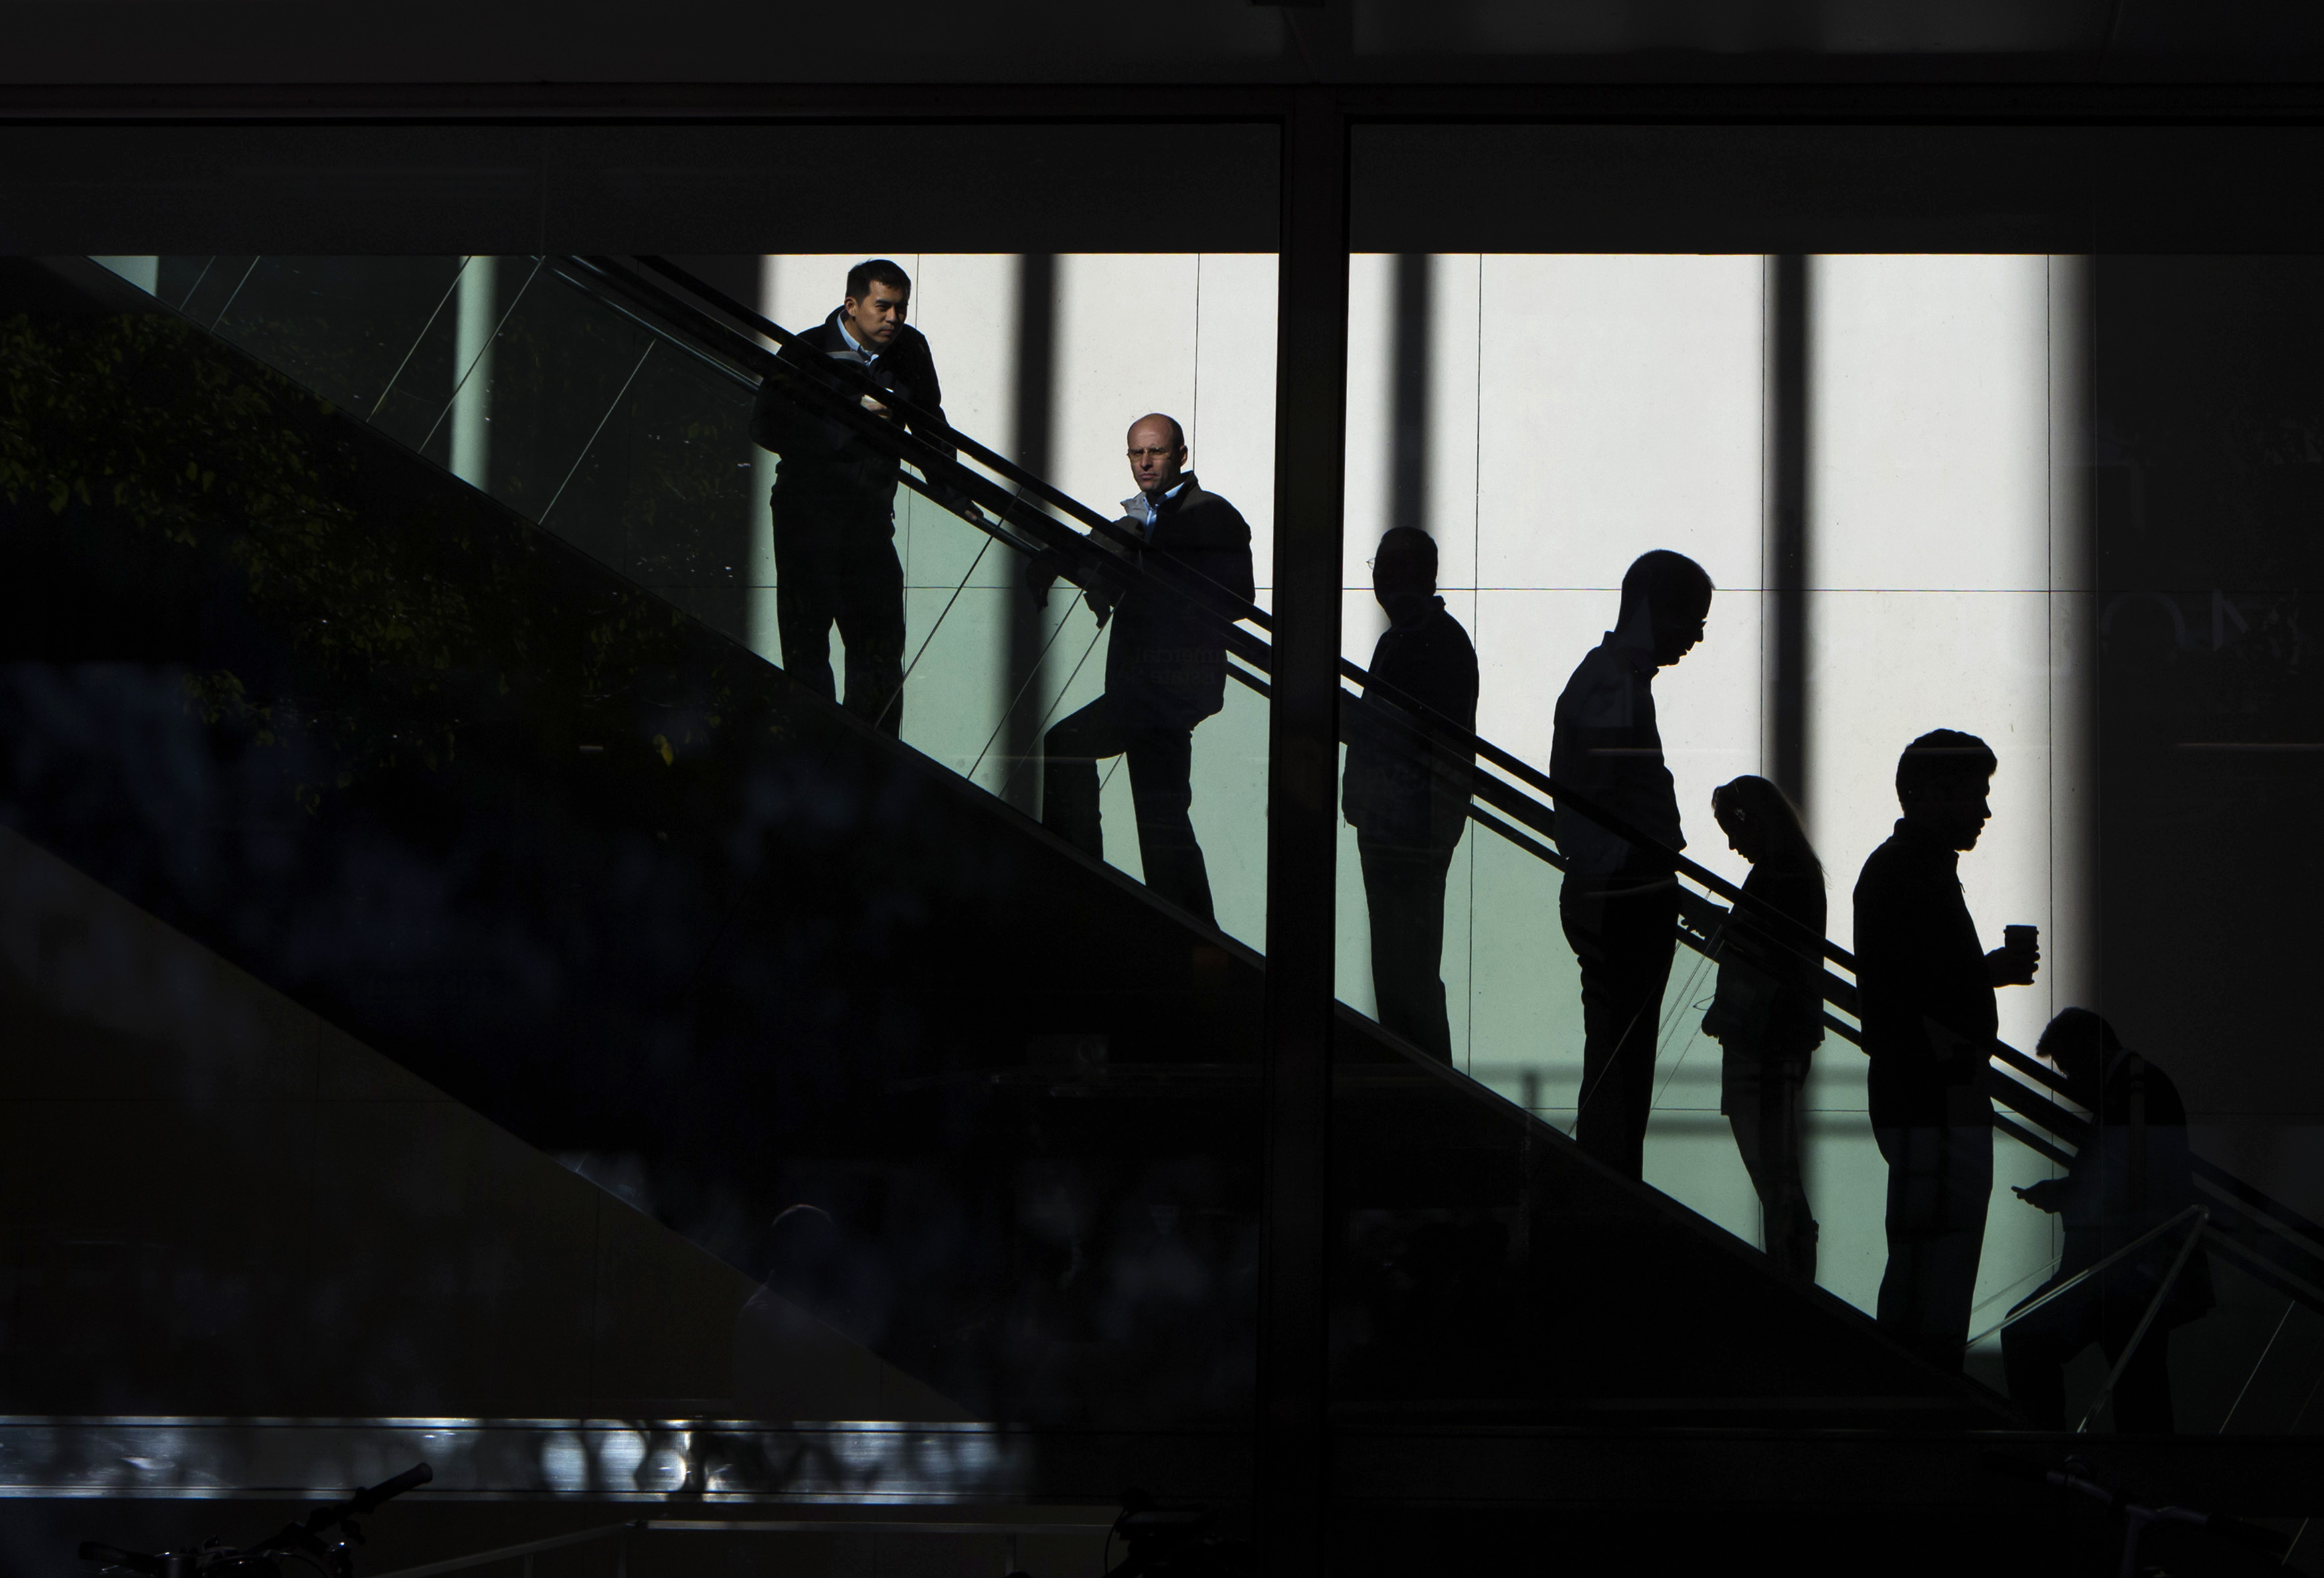 People ride the escalators in the JP Morgan & Chase Co. building in New York October 24, 2013.